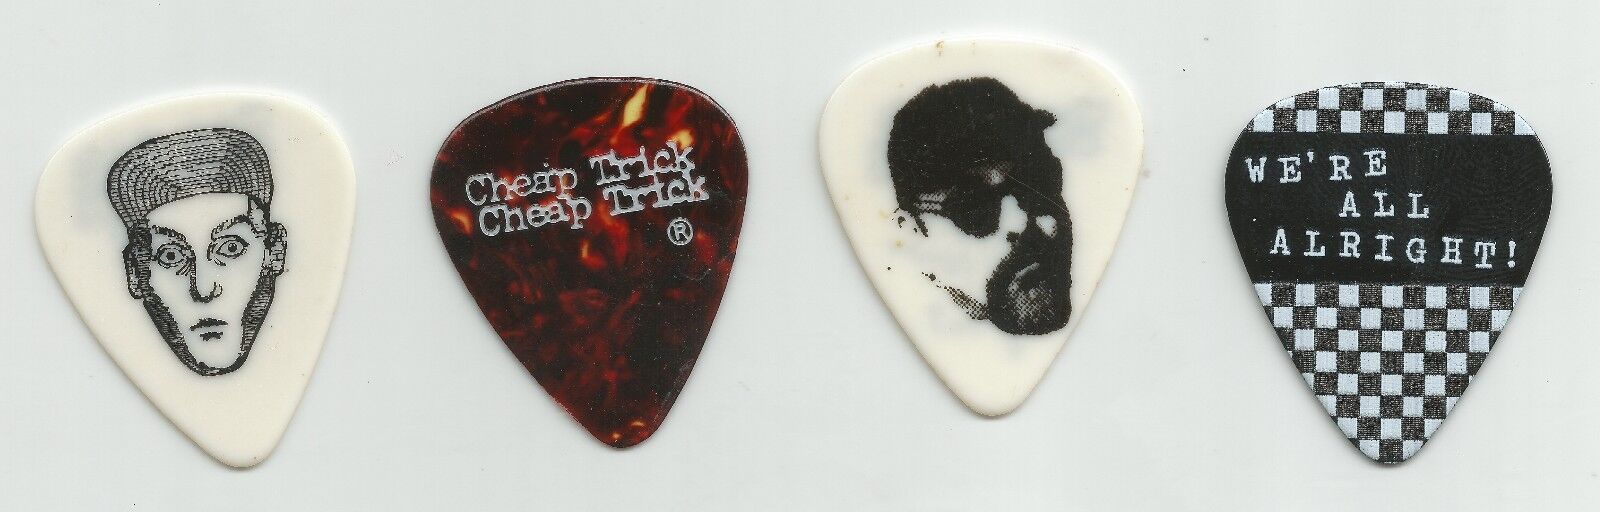 Guitar Pick Set by Max 48% OFF Mail order Cheap of 4 Trick Lot